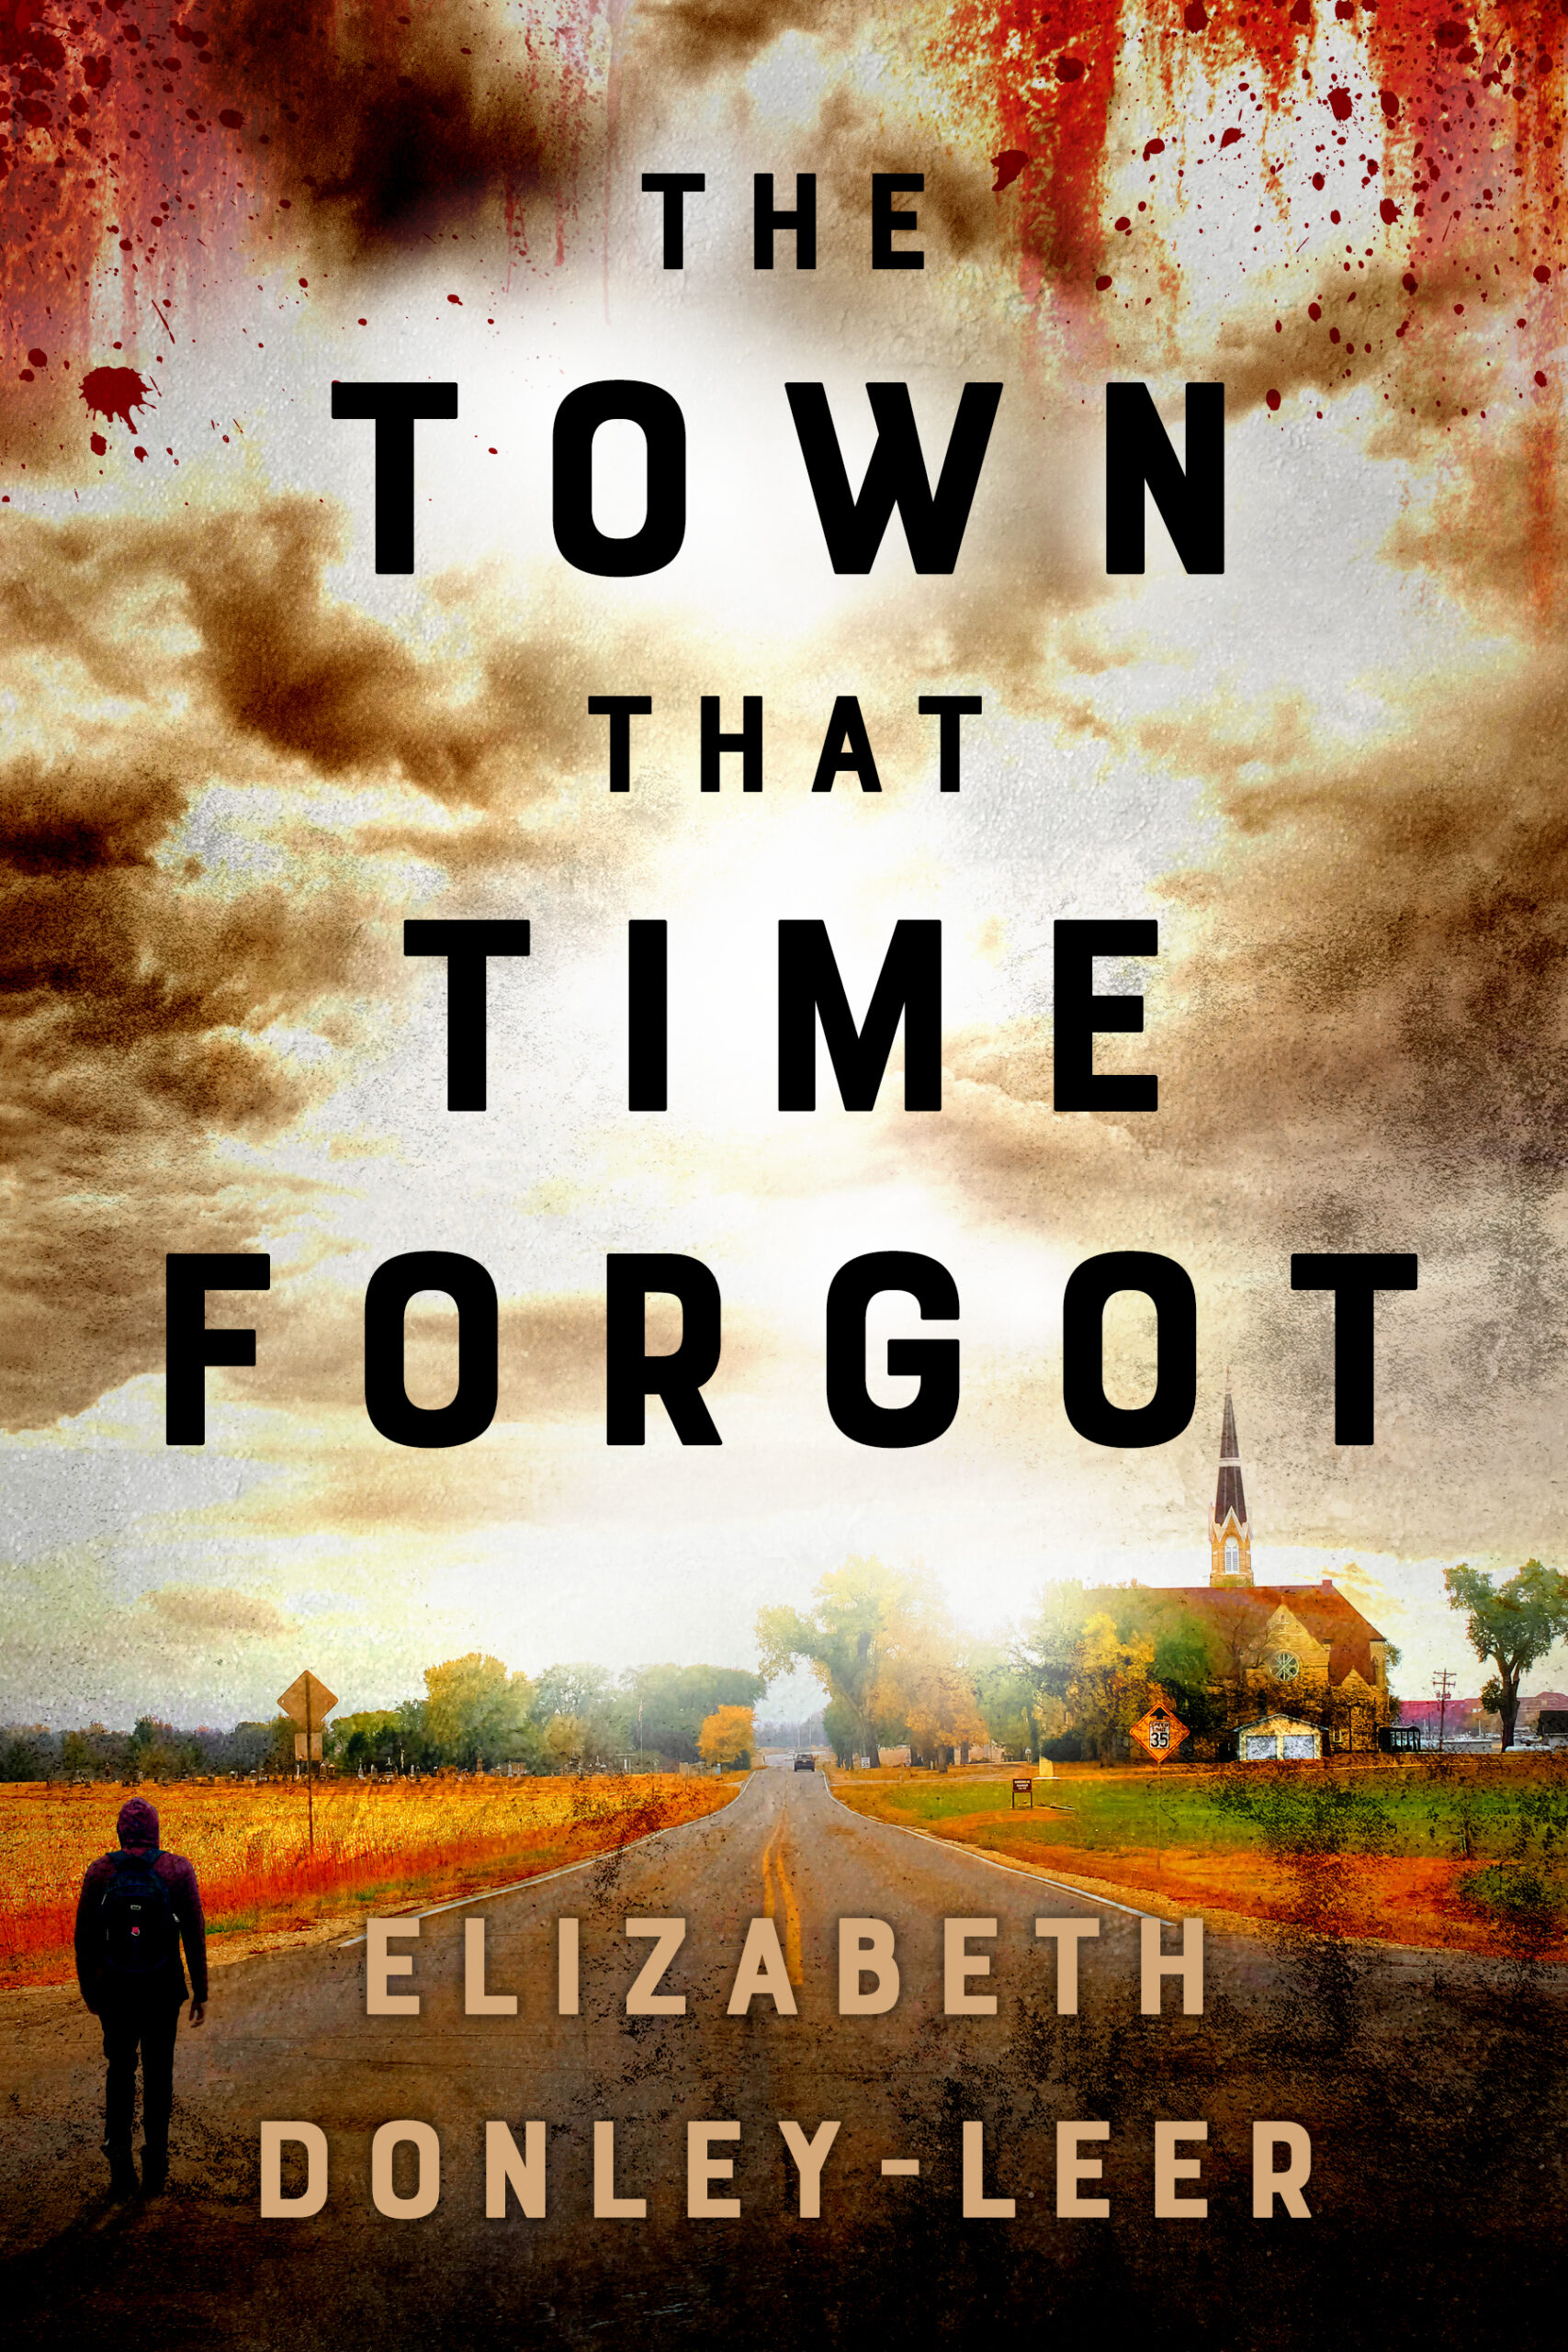 The Town That Time Forgot by Elizabeth Donley-Leer